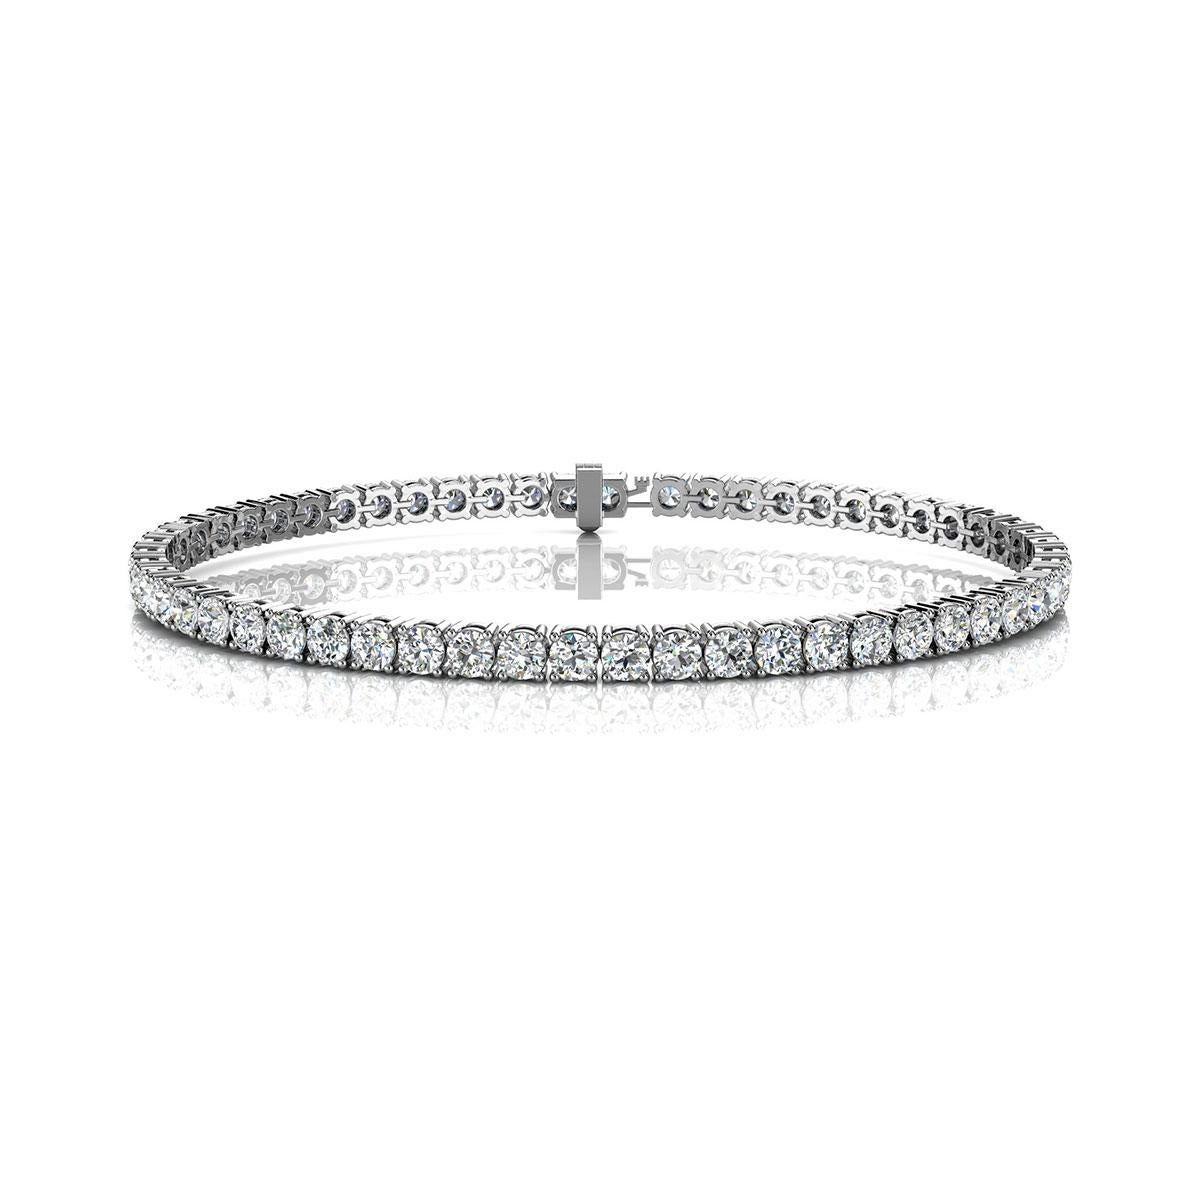 A timeless four prongs diamonds tennis bracelet. Experience the Difference!

Product details: 

Center Gemstone Type: NATURAL DIAMOND
Center Gemstone Color: WHITE
Center Gemstone Shape: ROUND
Center Diamond Carat Weight: 5
Metal: 18K White